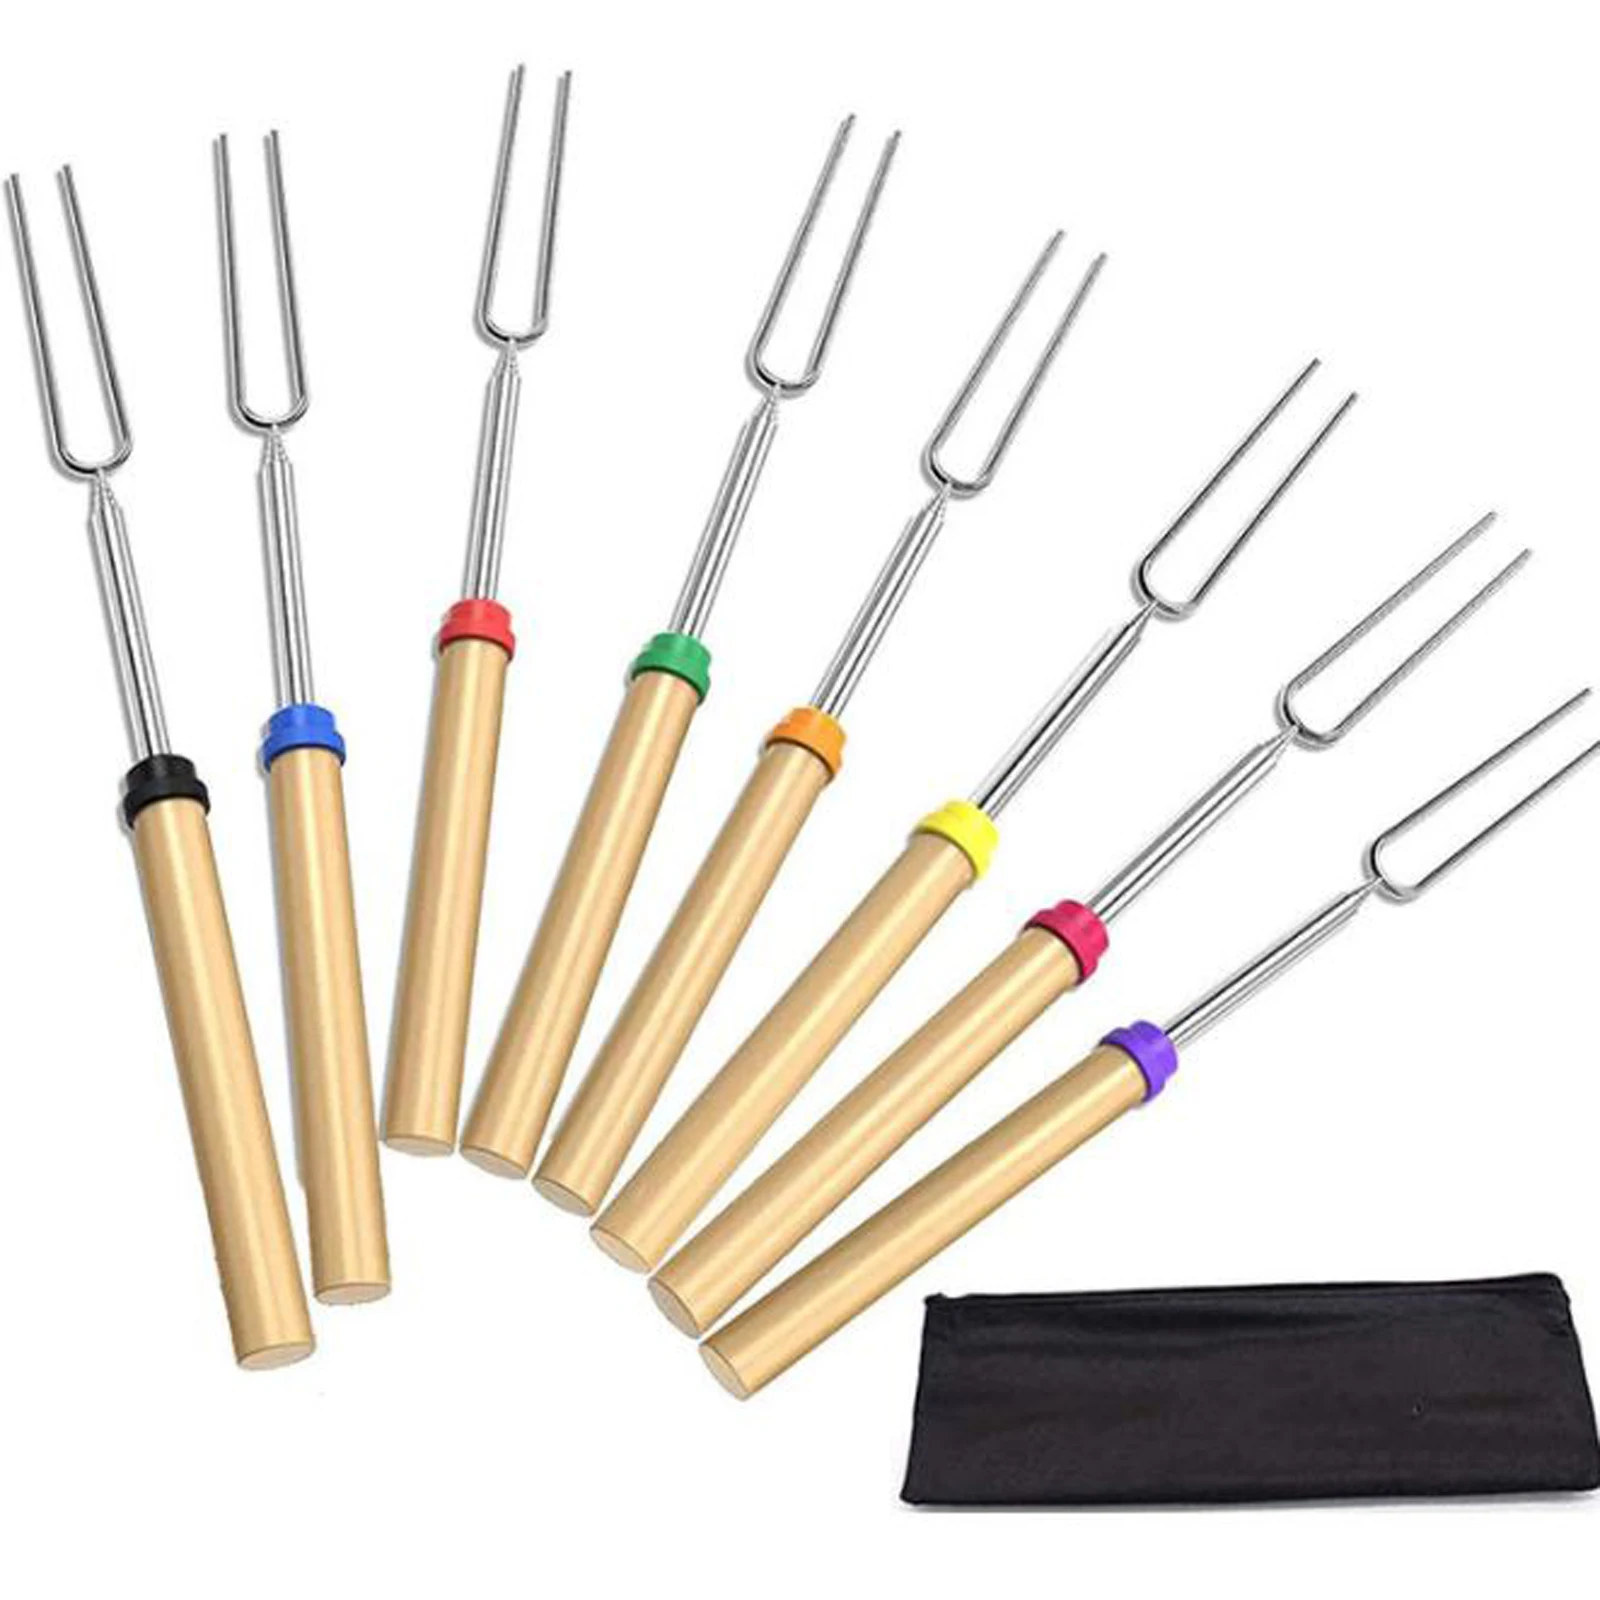 8PCS Stainless Steel BBQ Skewers Telescoping Roasting Stick Wooden Handle Fork 